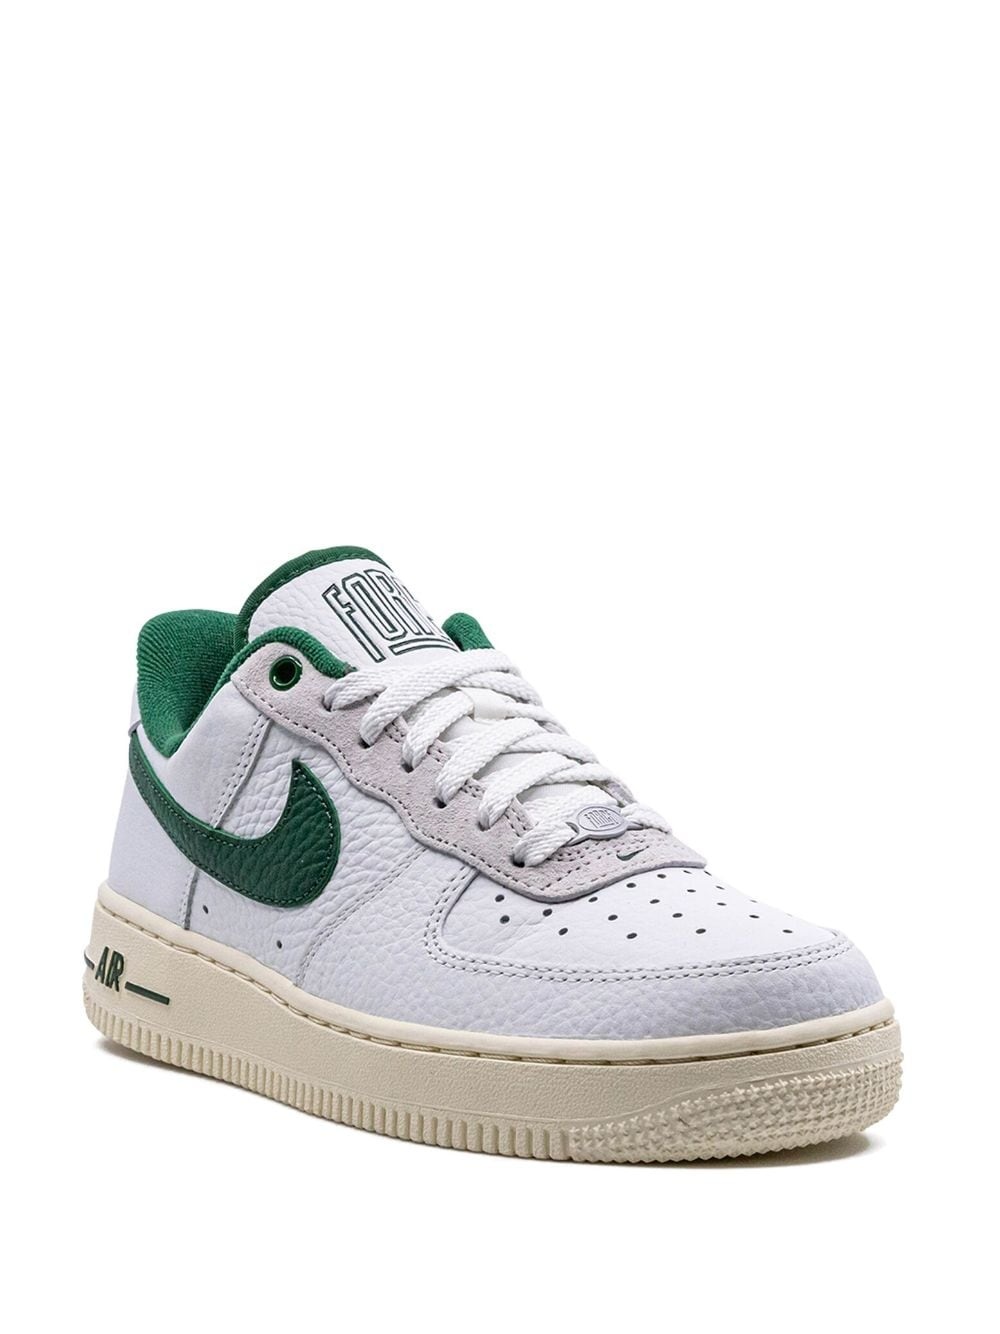 Air Force 1 '07 "Command Force Gorge Green" sneakers - 2